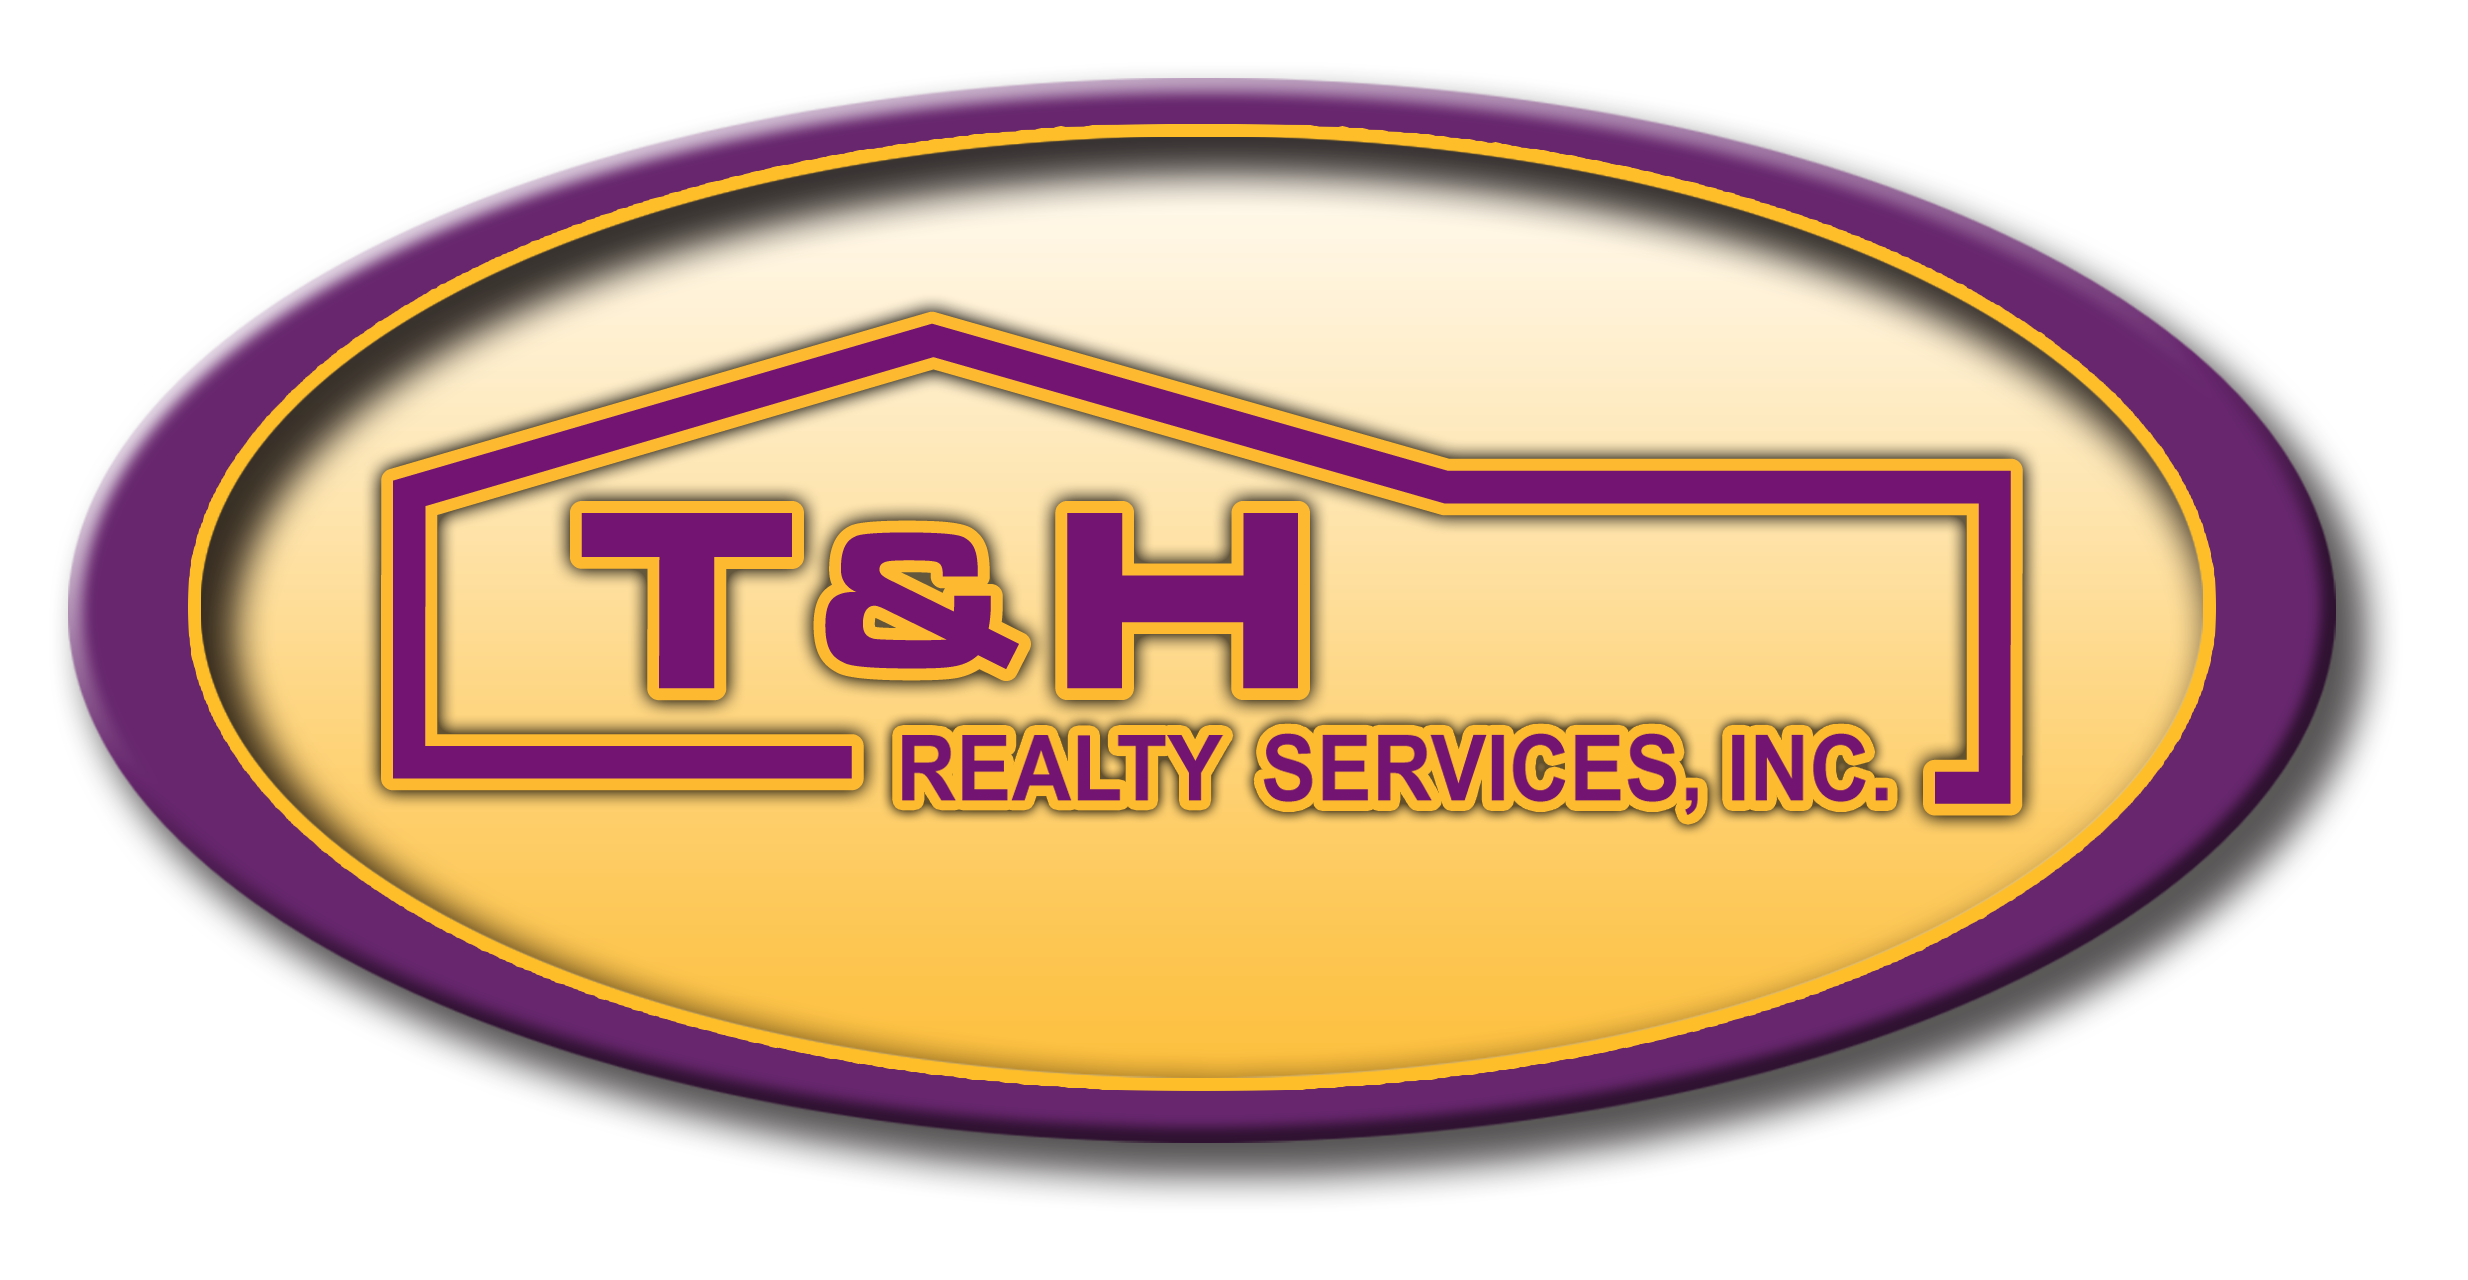 T&H Realty Services